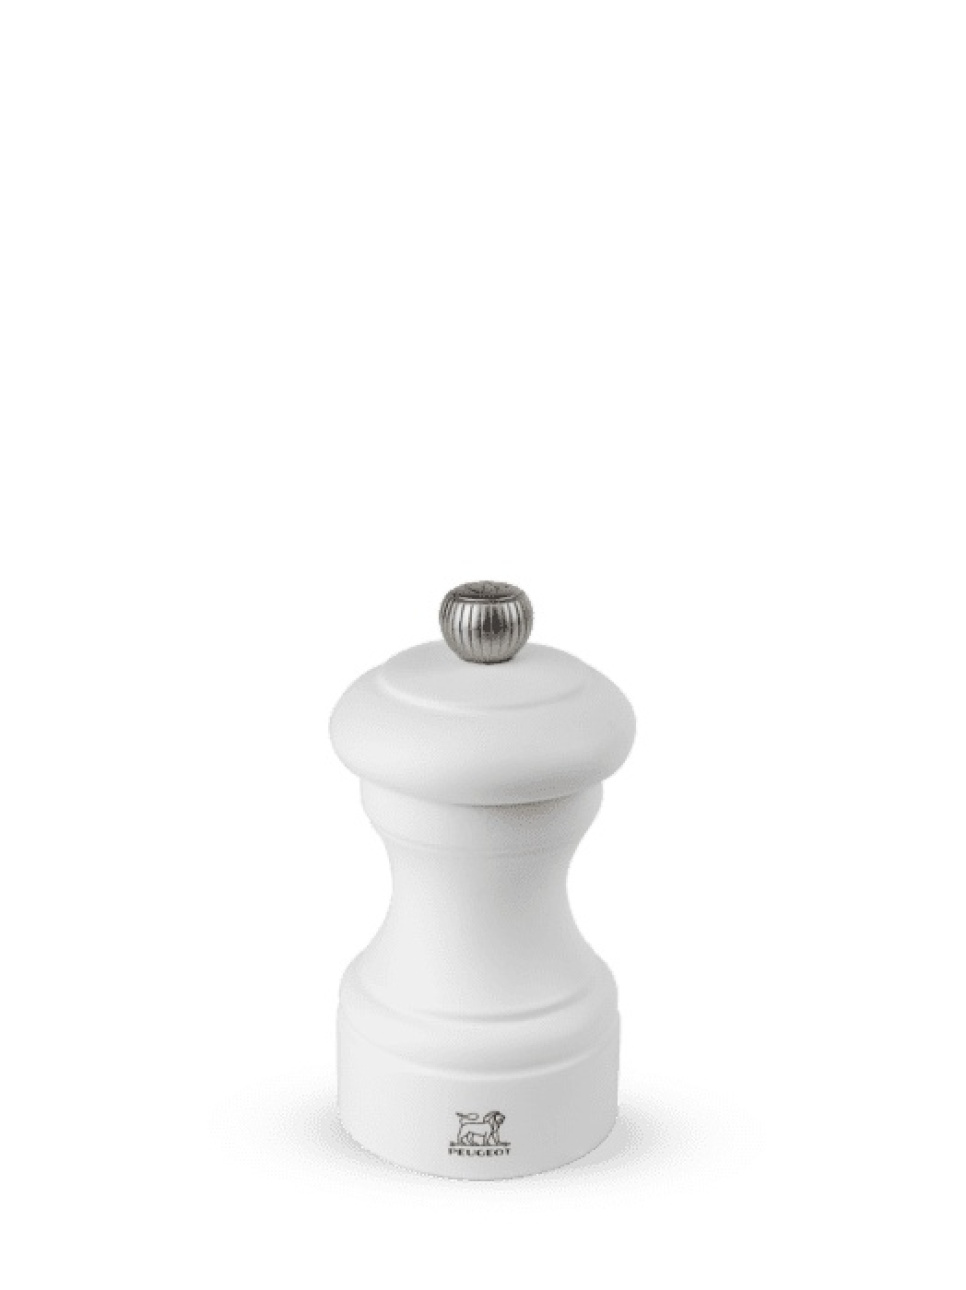 Bistro White Pepper mill 10 cm - Peugeot in the group Cooking / Kitchen utensils / Salt & pepper mills at KitchenLab (1090-16701)